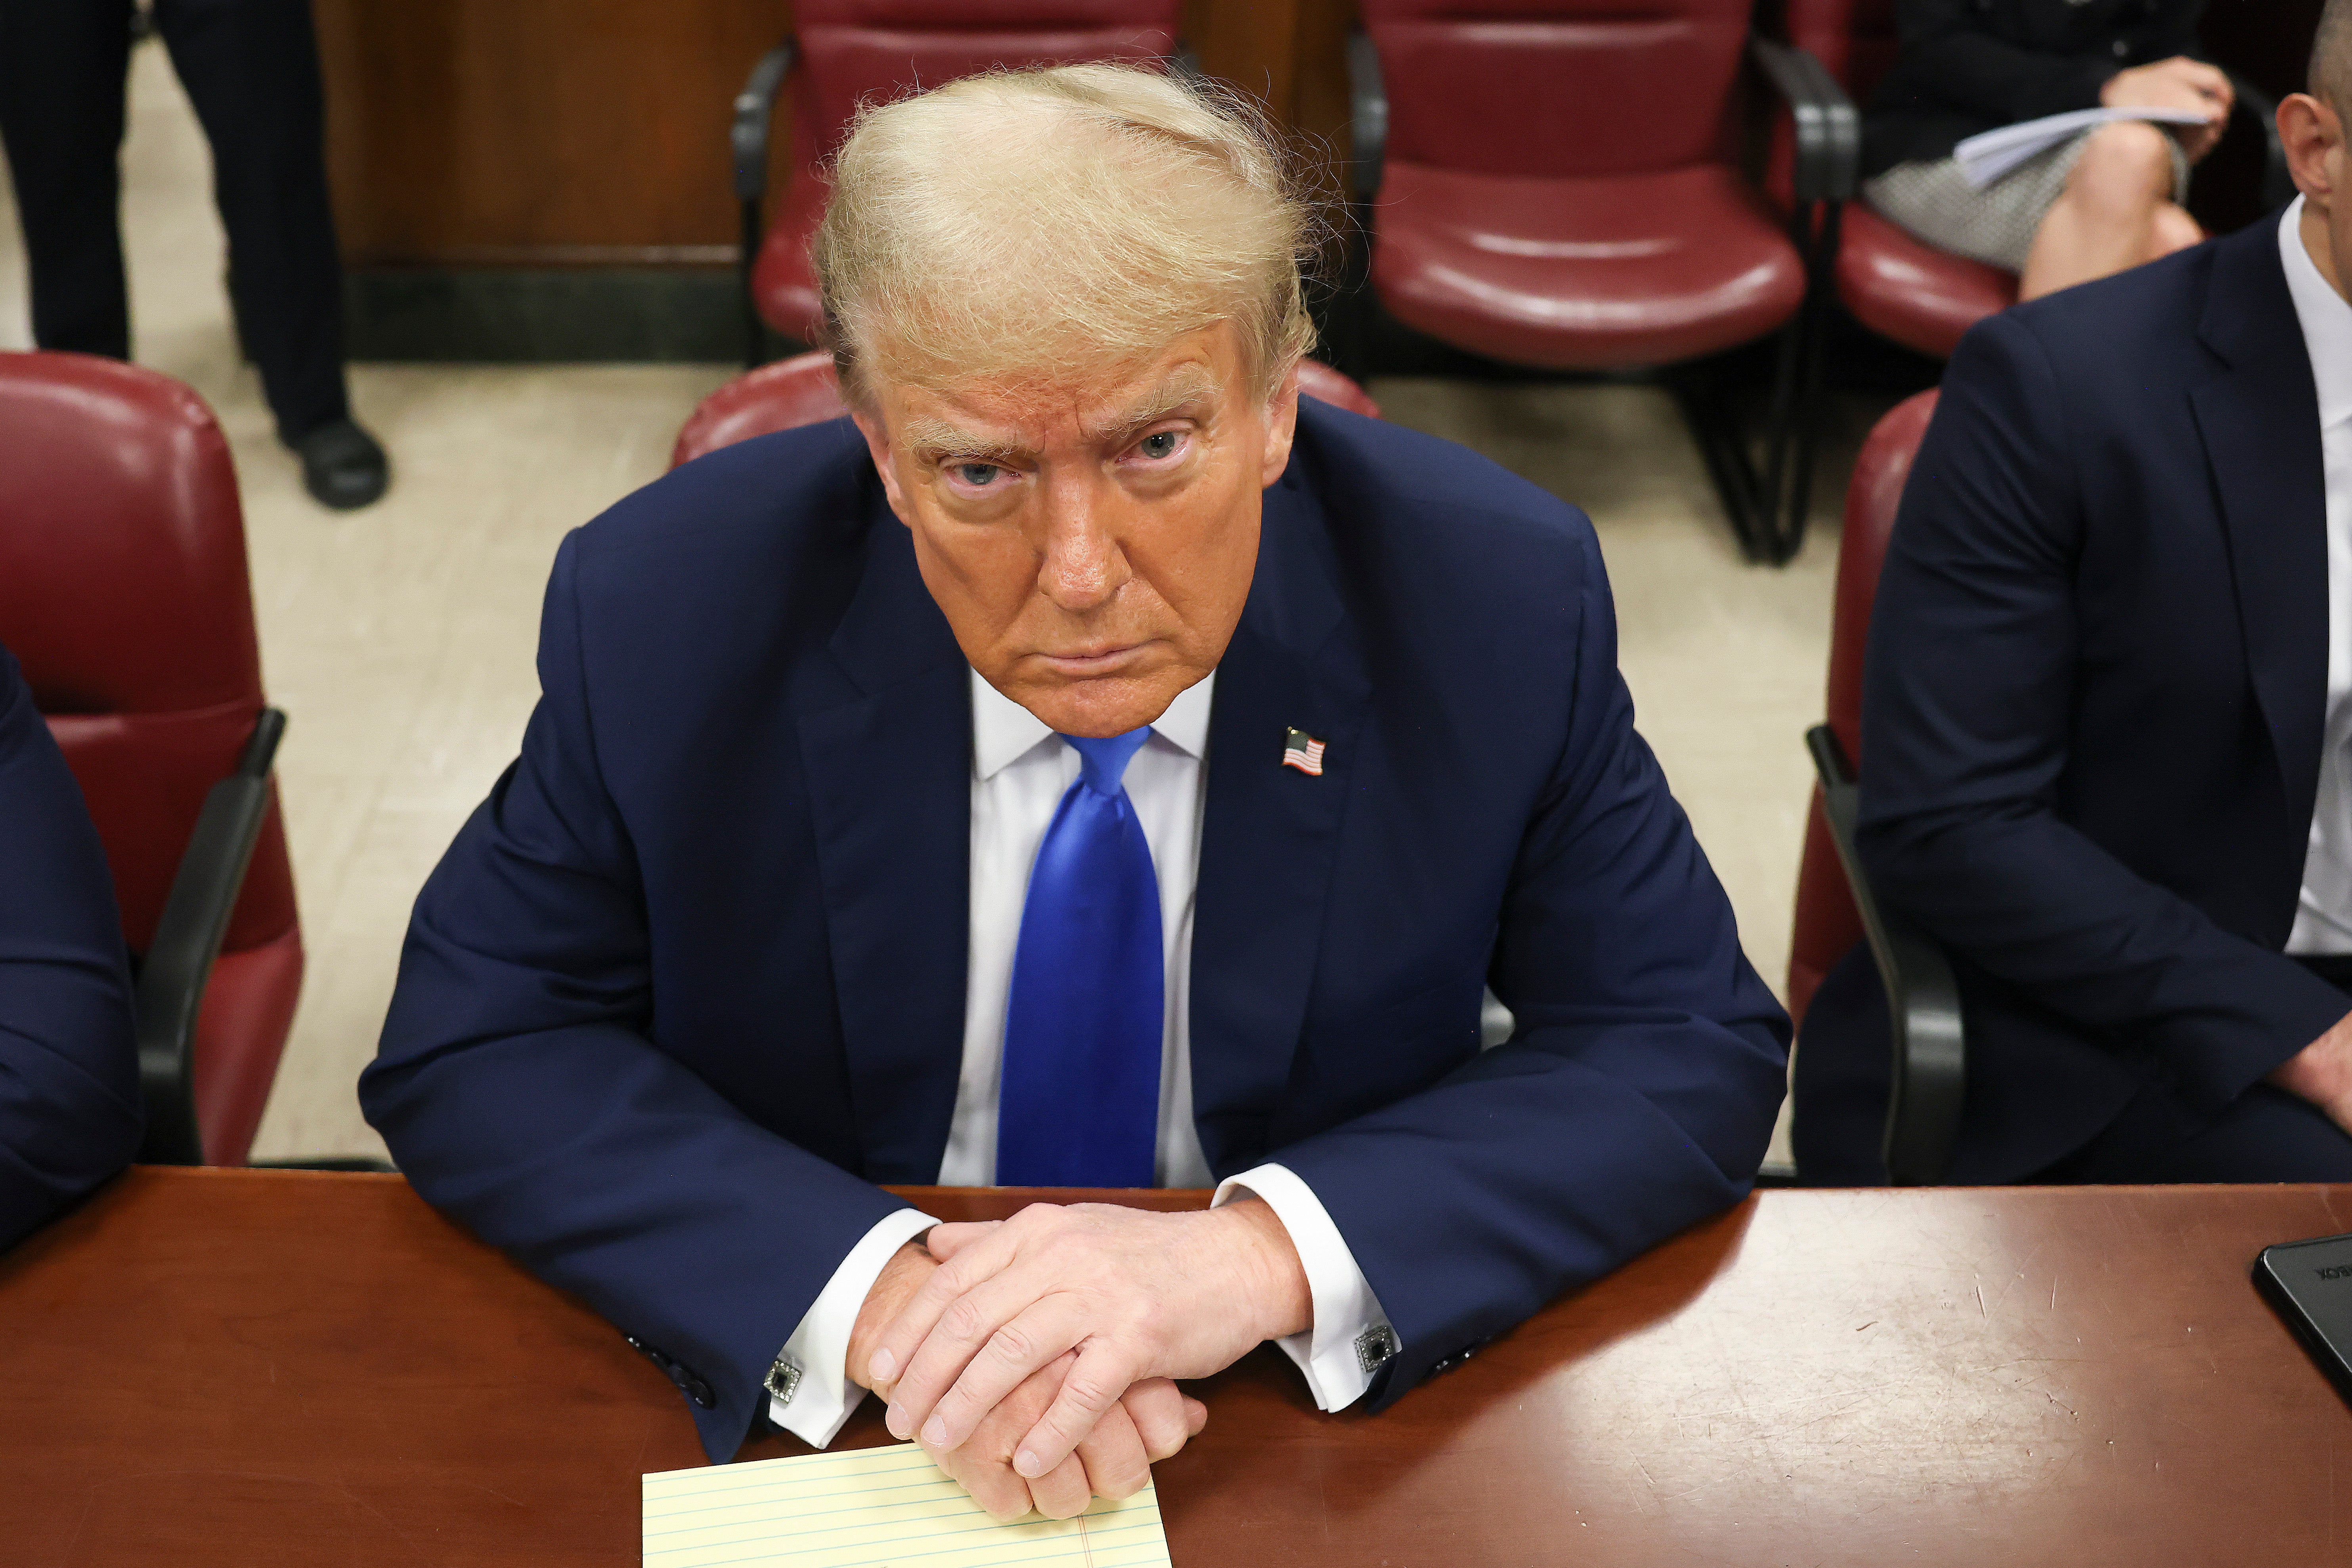 Donald Trump sits at the defence table in a Manhattan criminal courtroom on 22 April